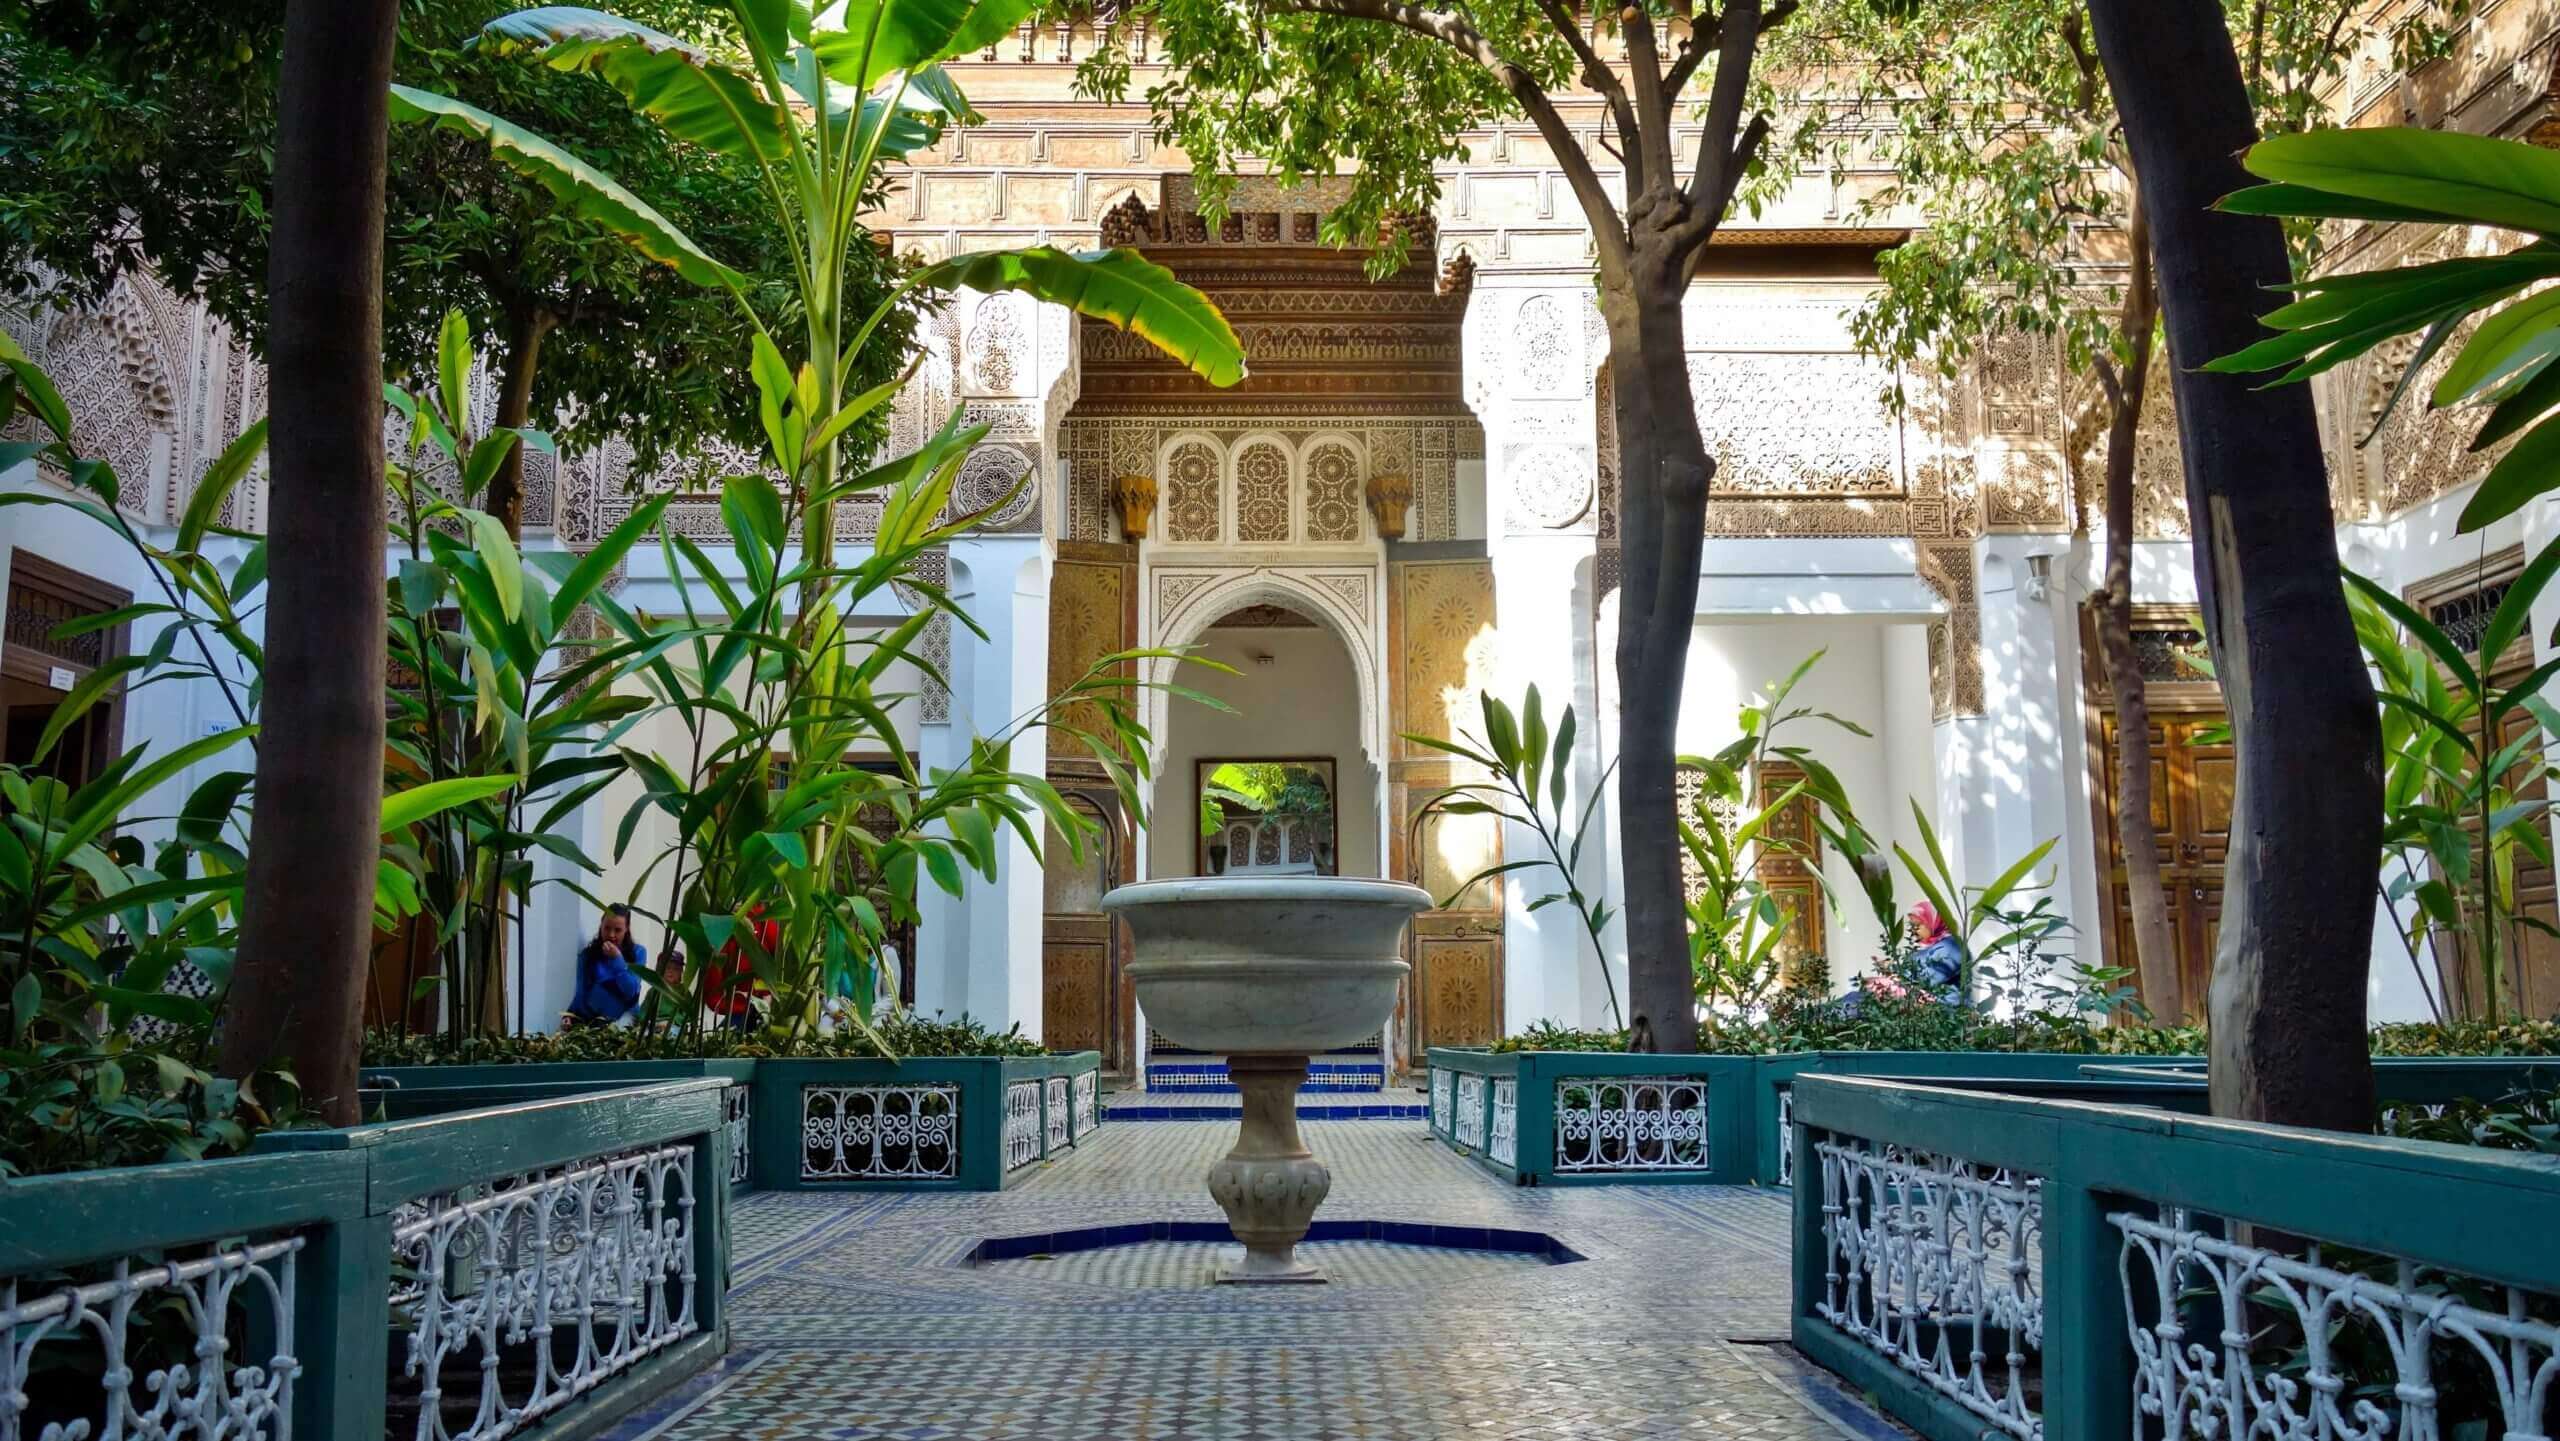 Serene corners and architectural wonders at Bahia Palace through our captivating imagery.